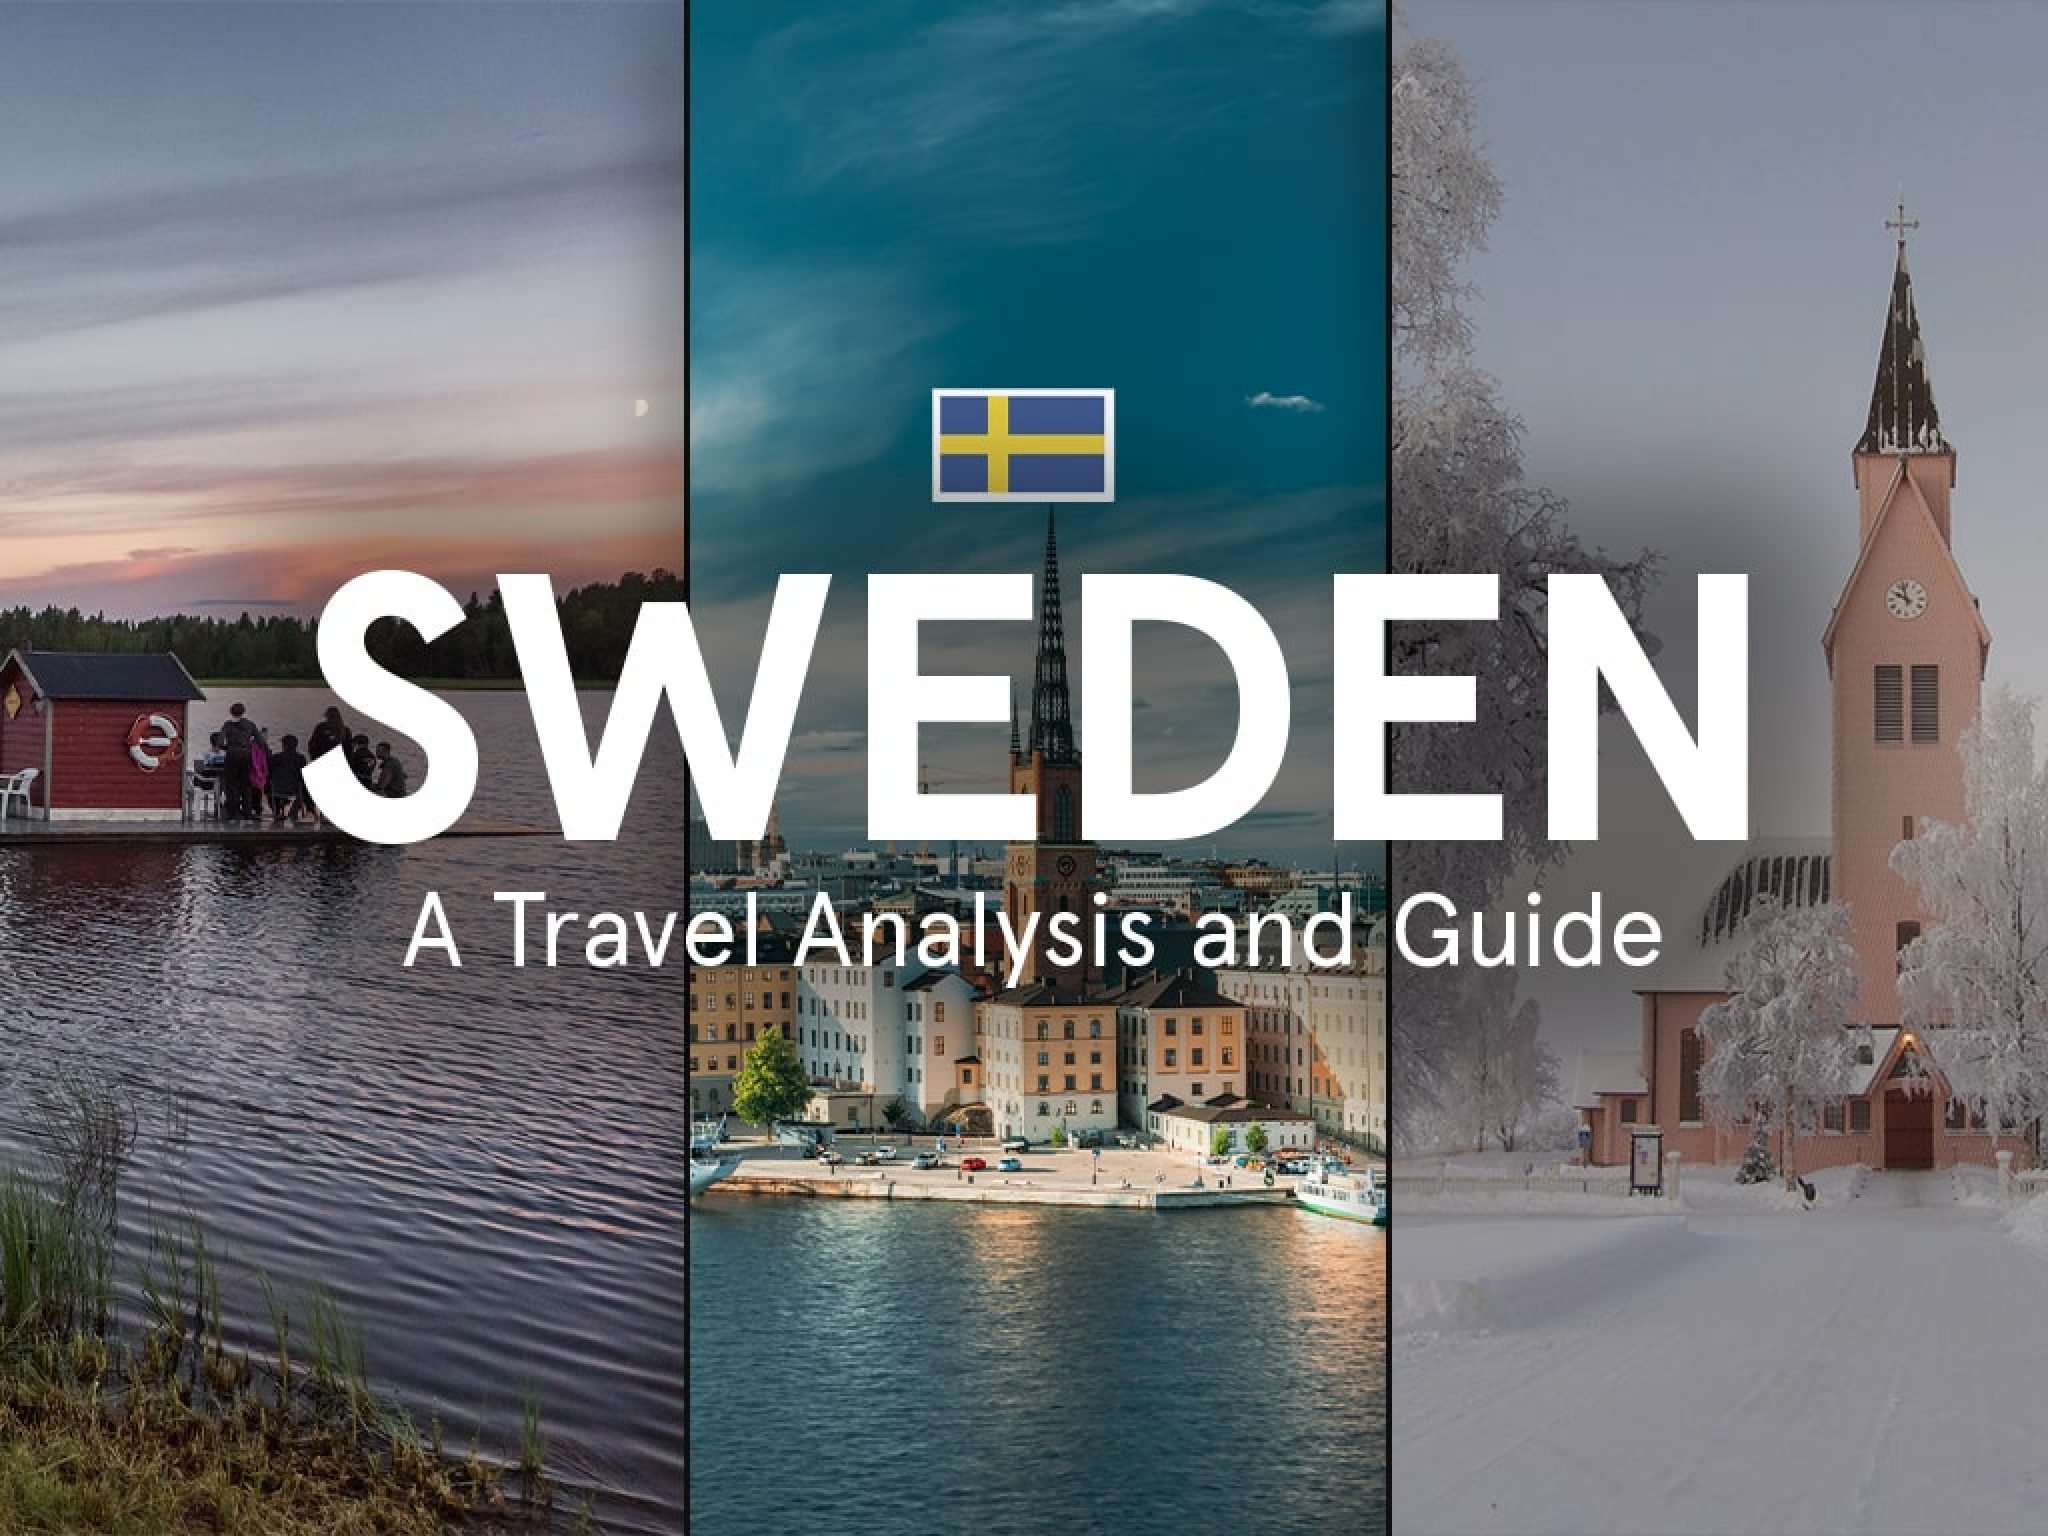 sweden cost of travel